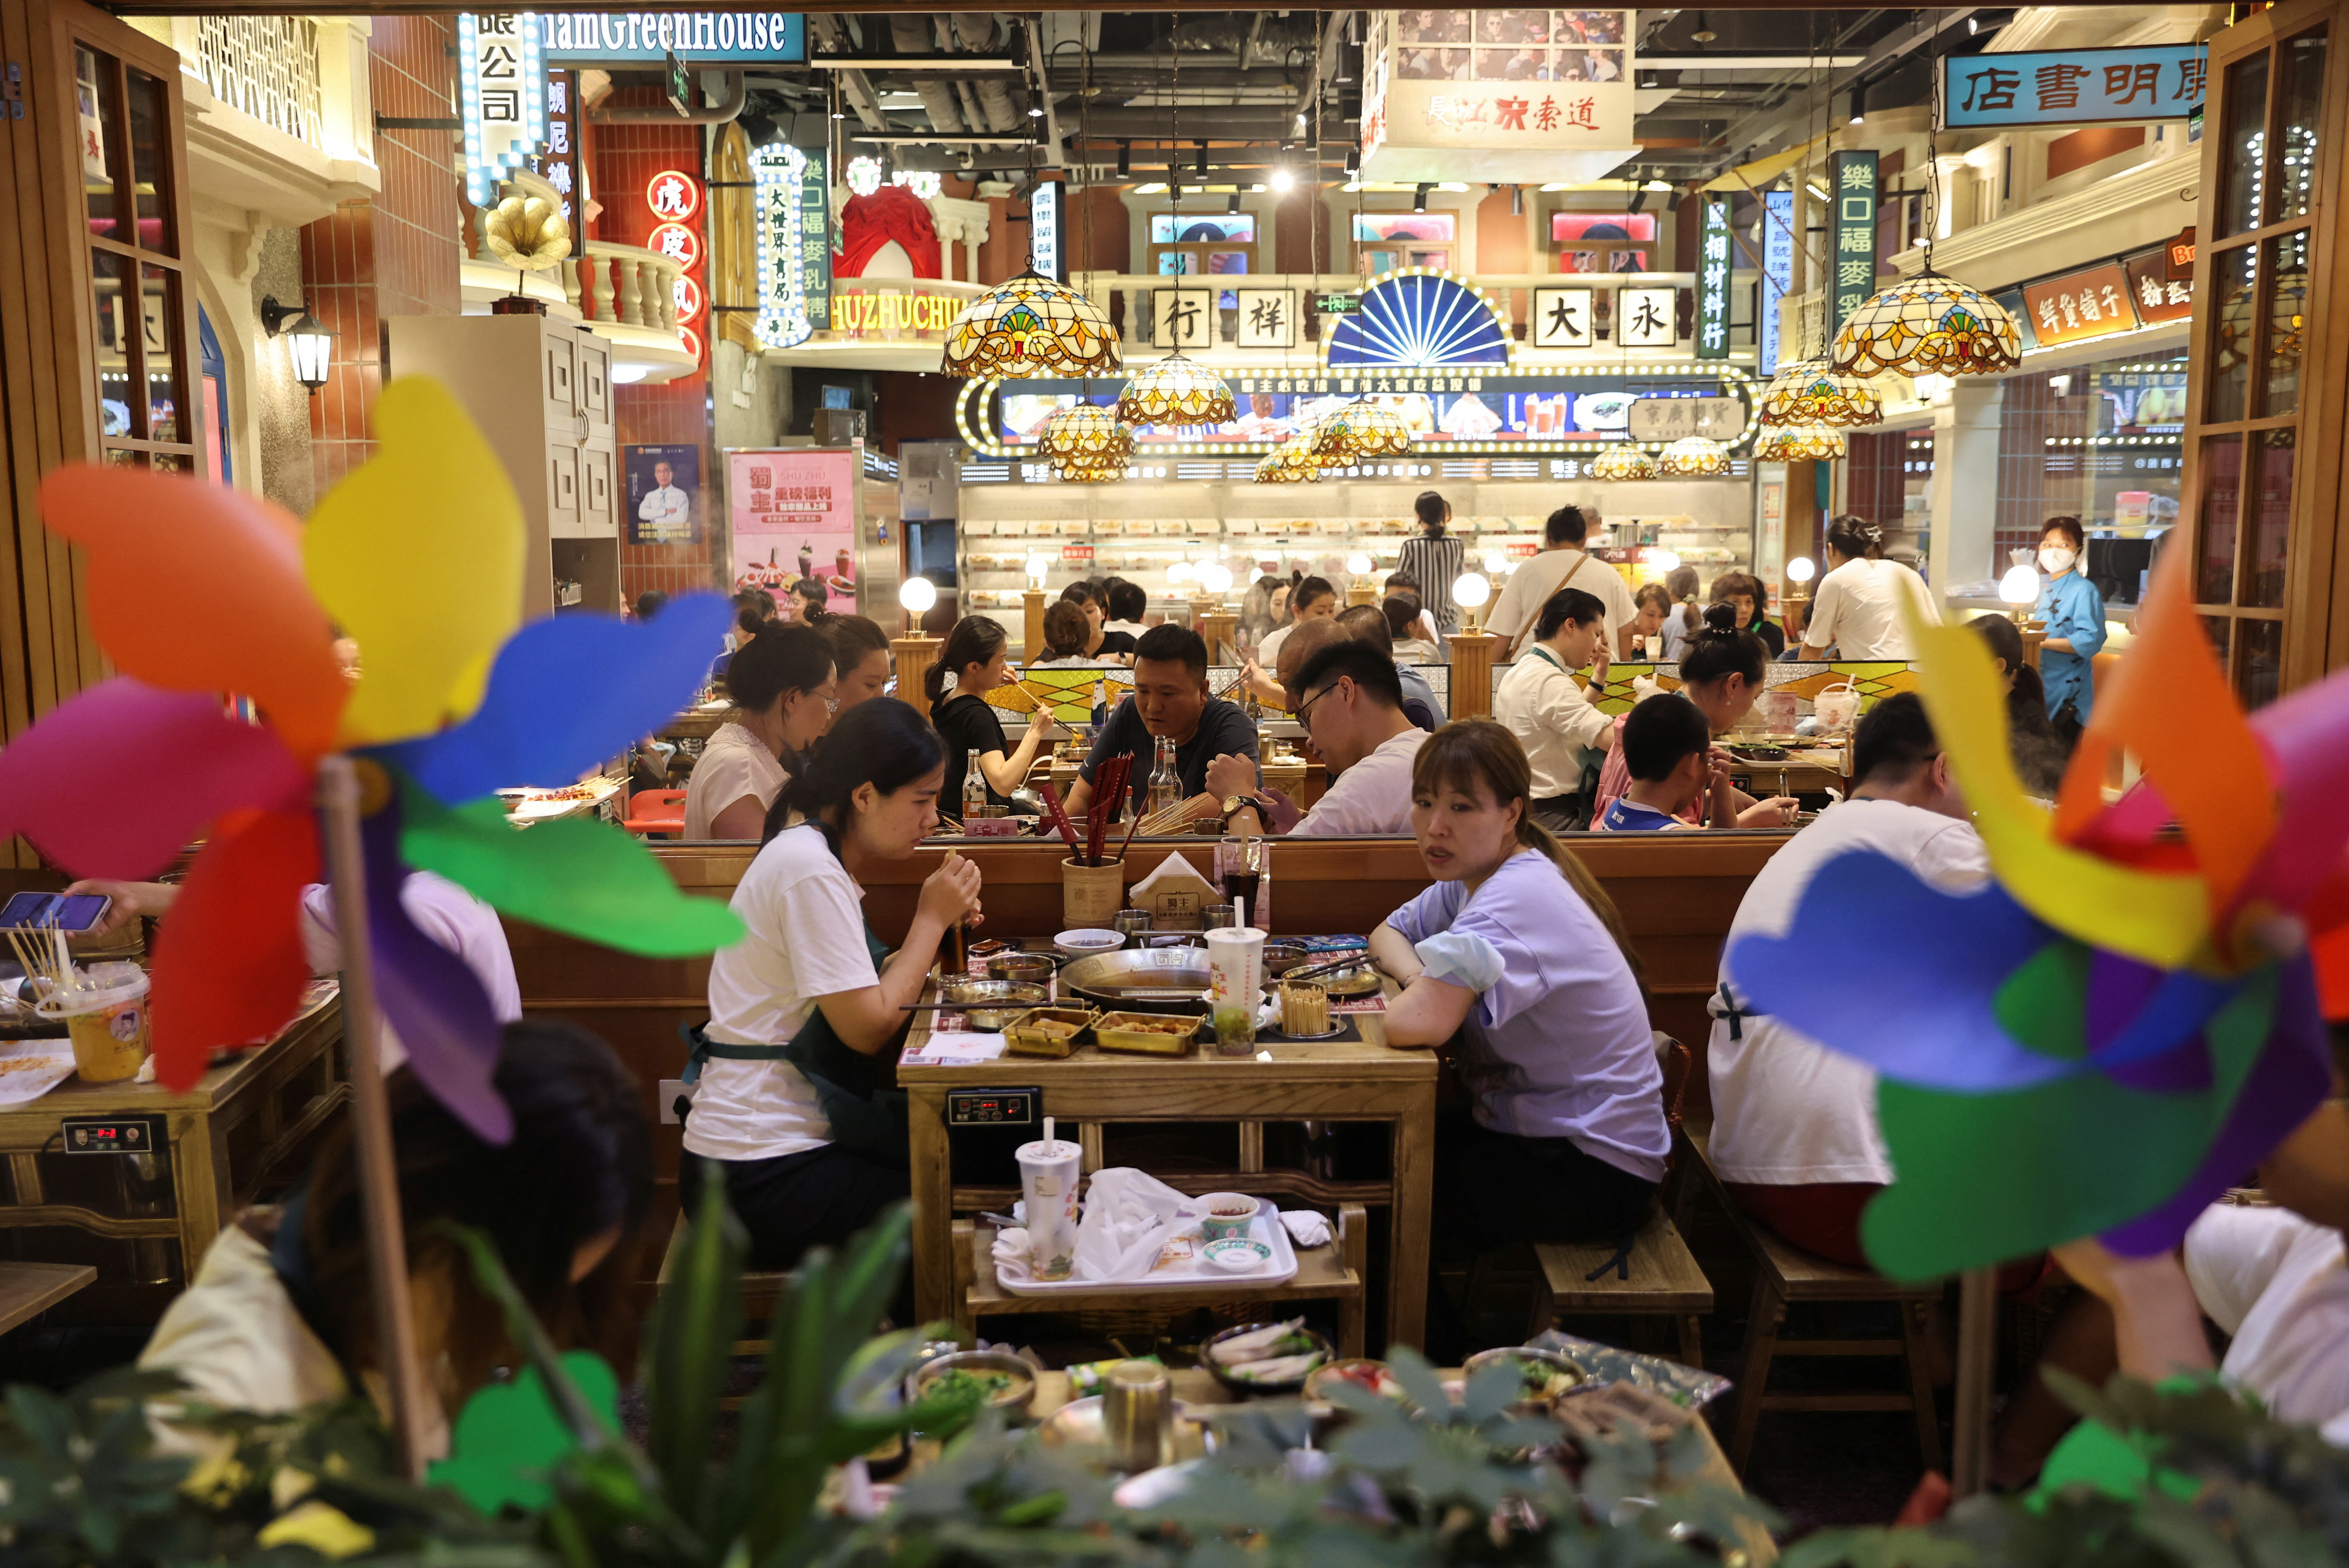 Customers dine at a restaurant in a shopping area in Beijing